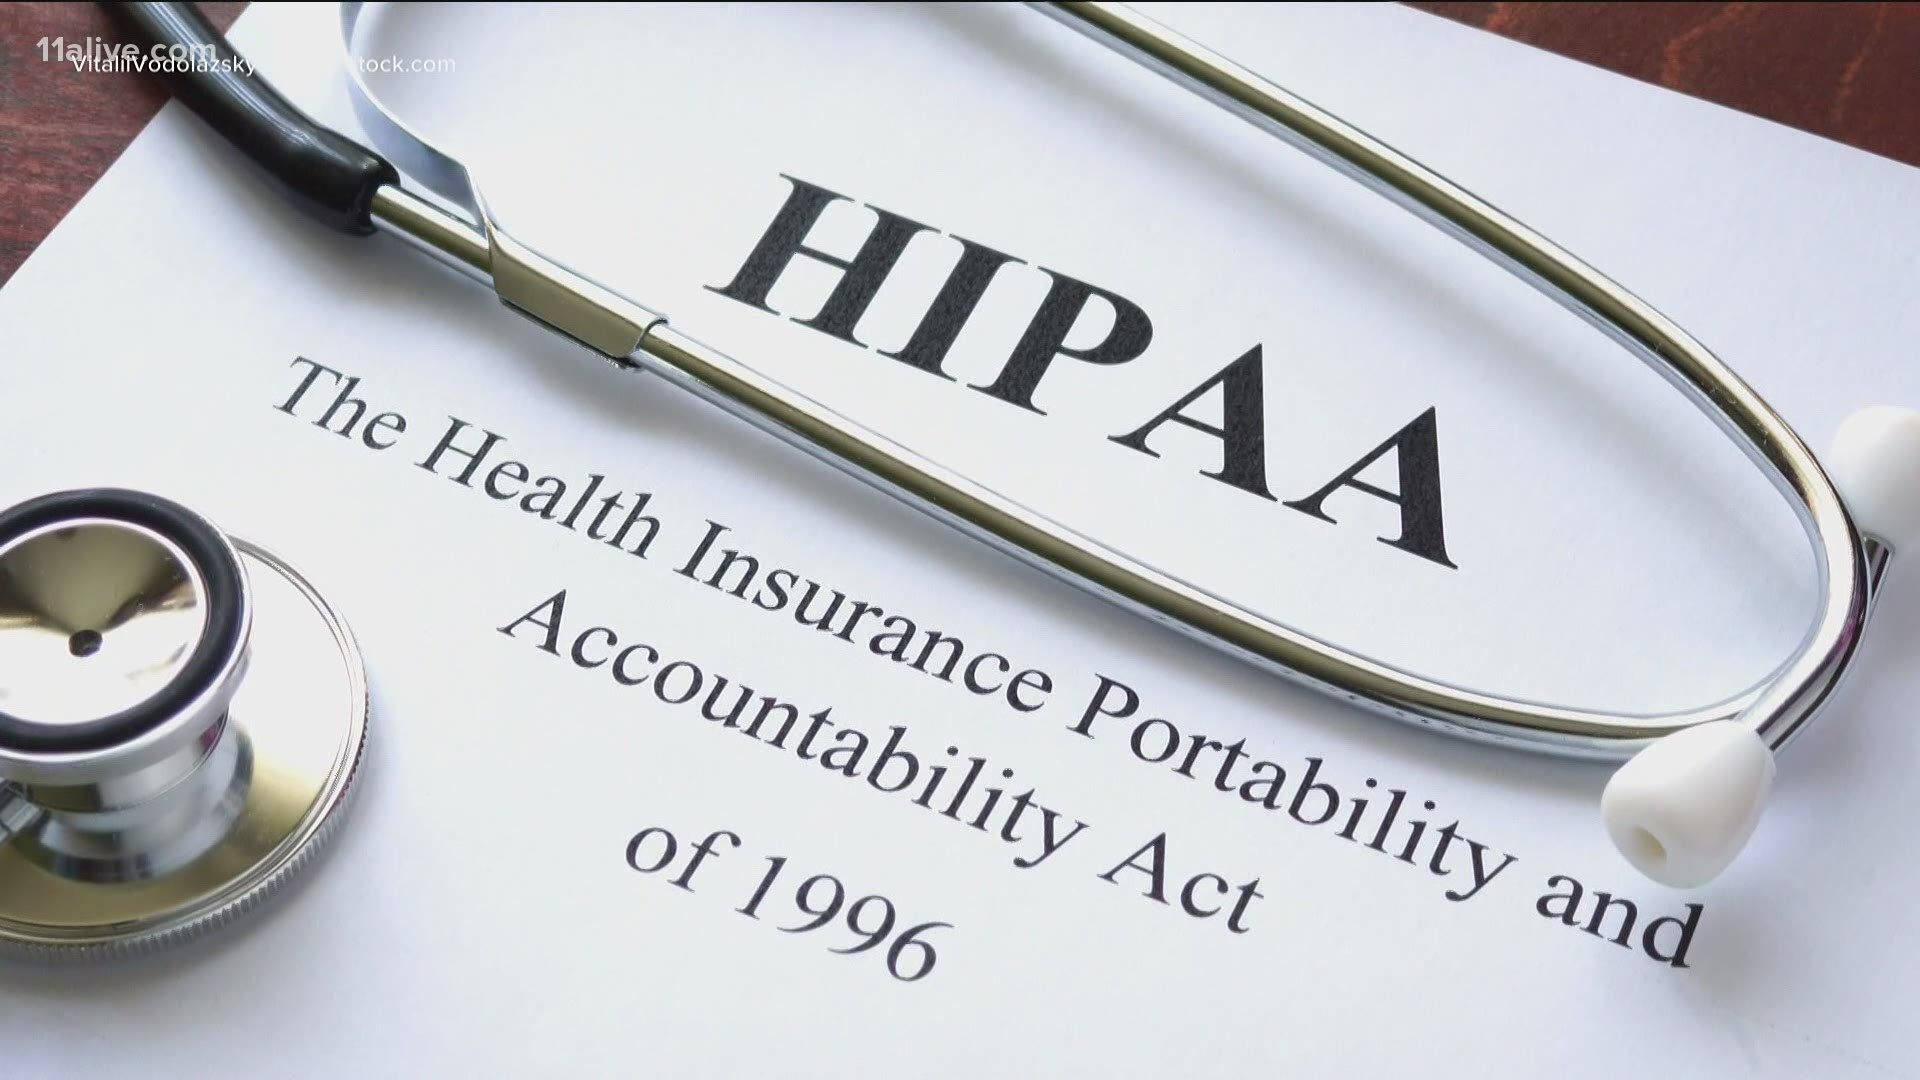 Experts say that it does not violate HIPAA, but requiring proof of vaccination may face other legal challenges.